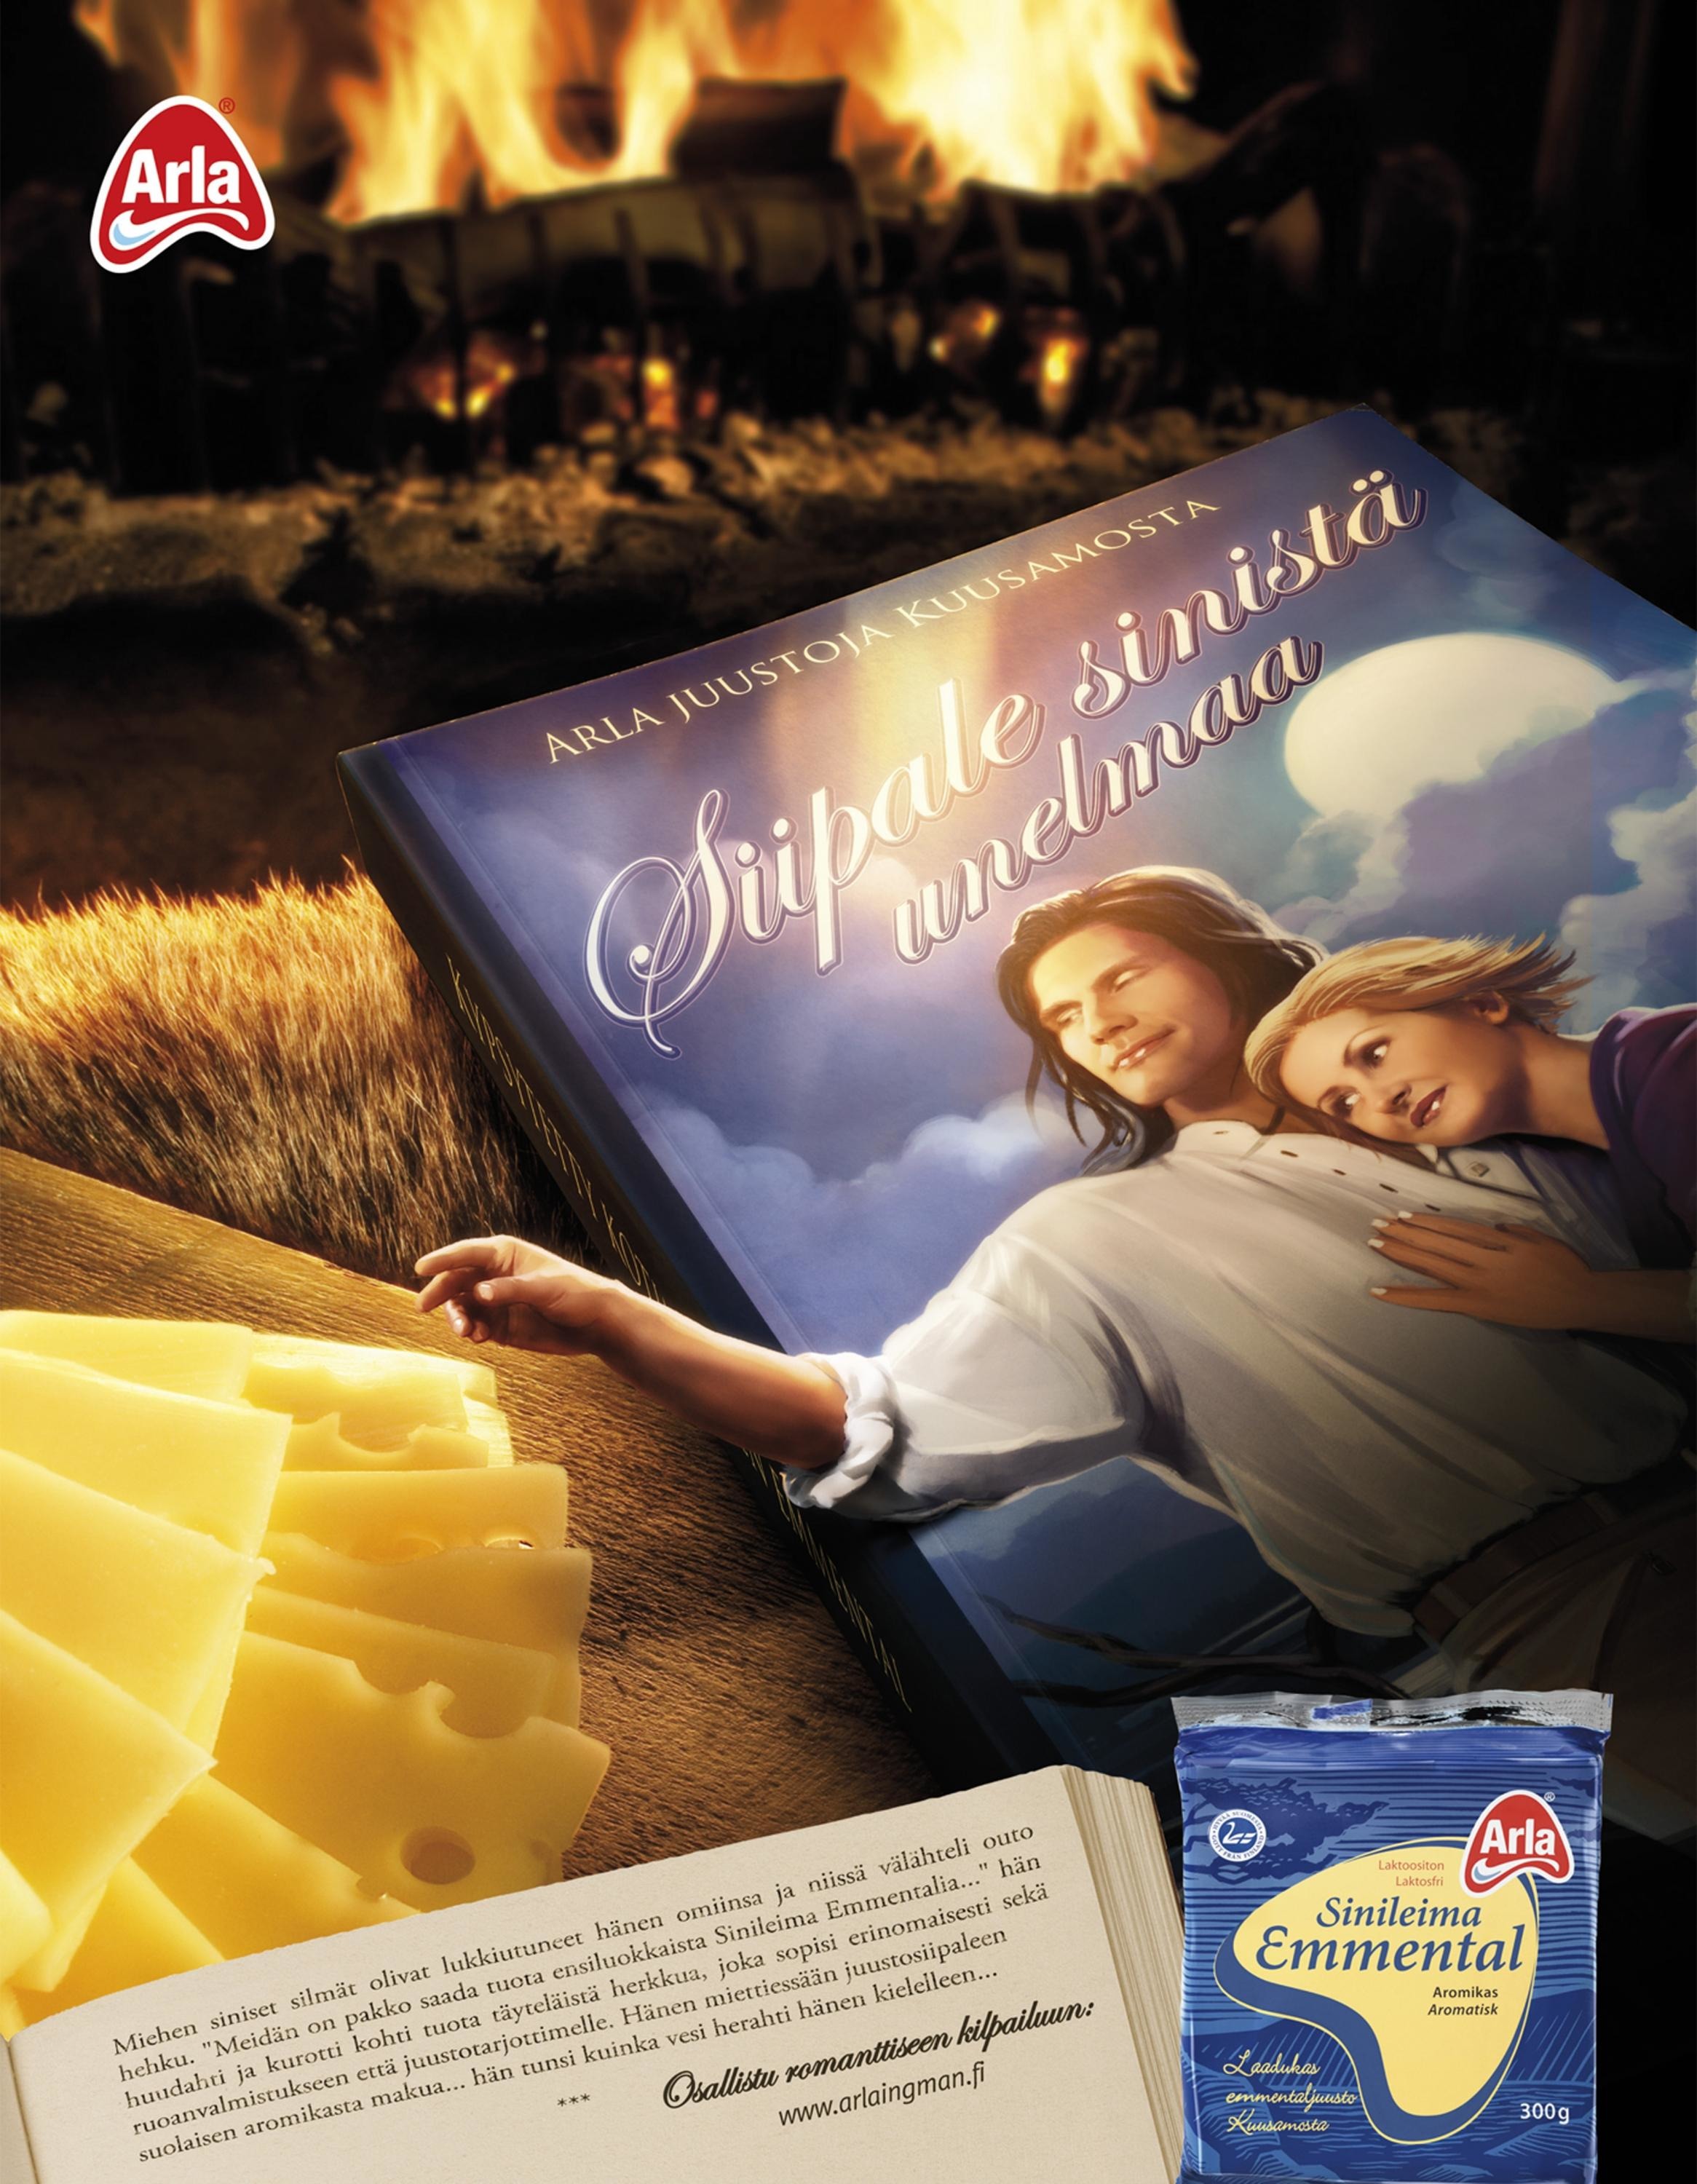 ARLA EMMENTAL CHEESE PRODUCTS